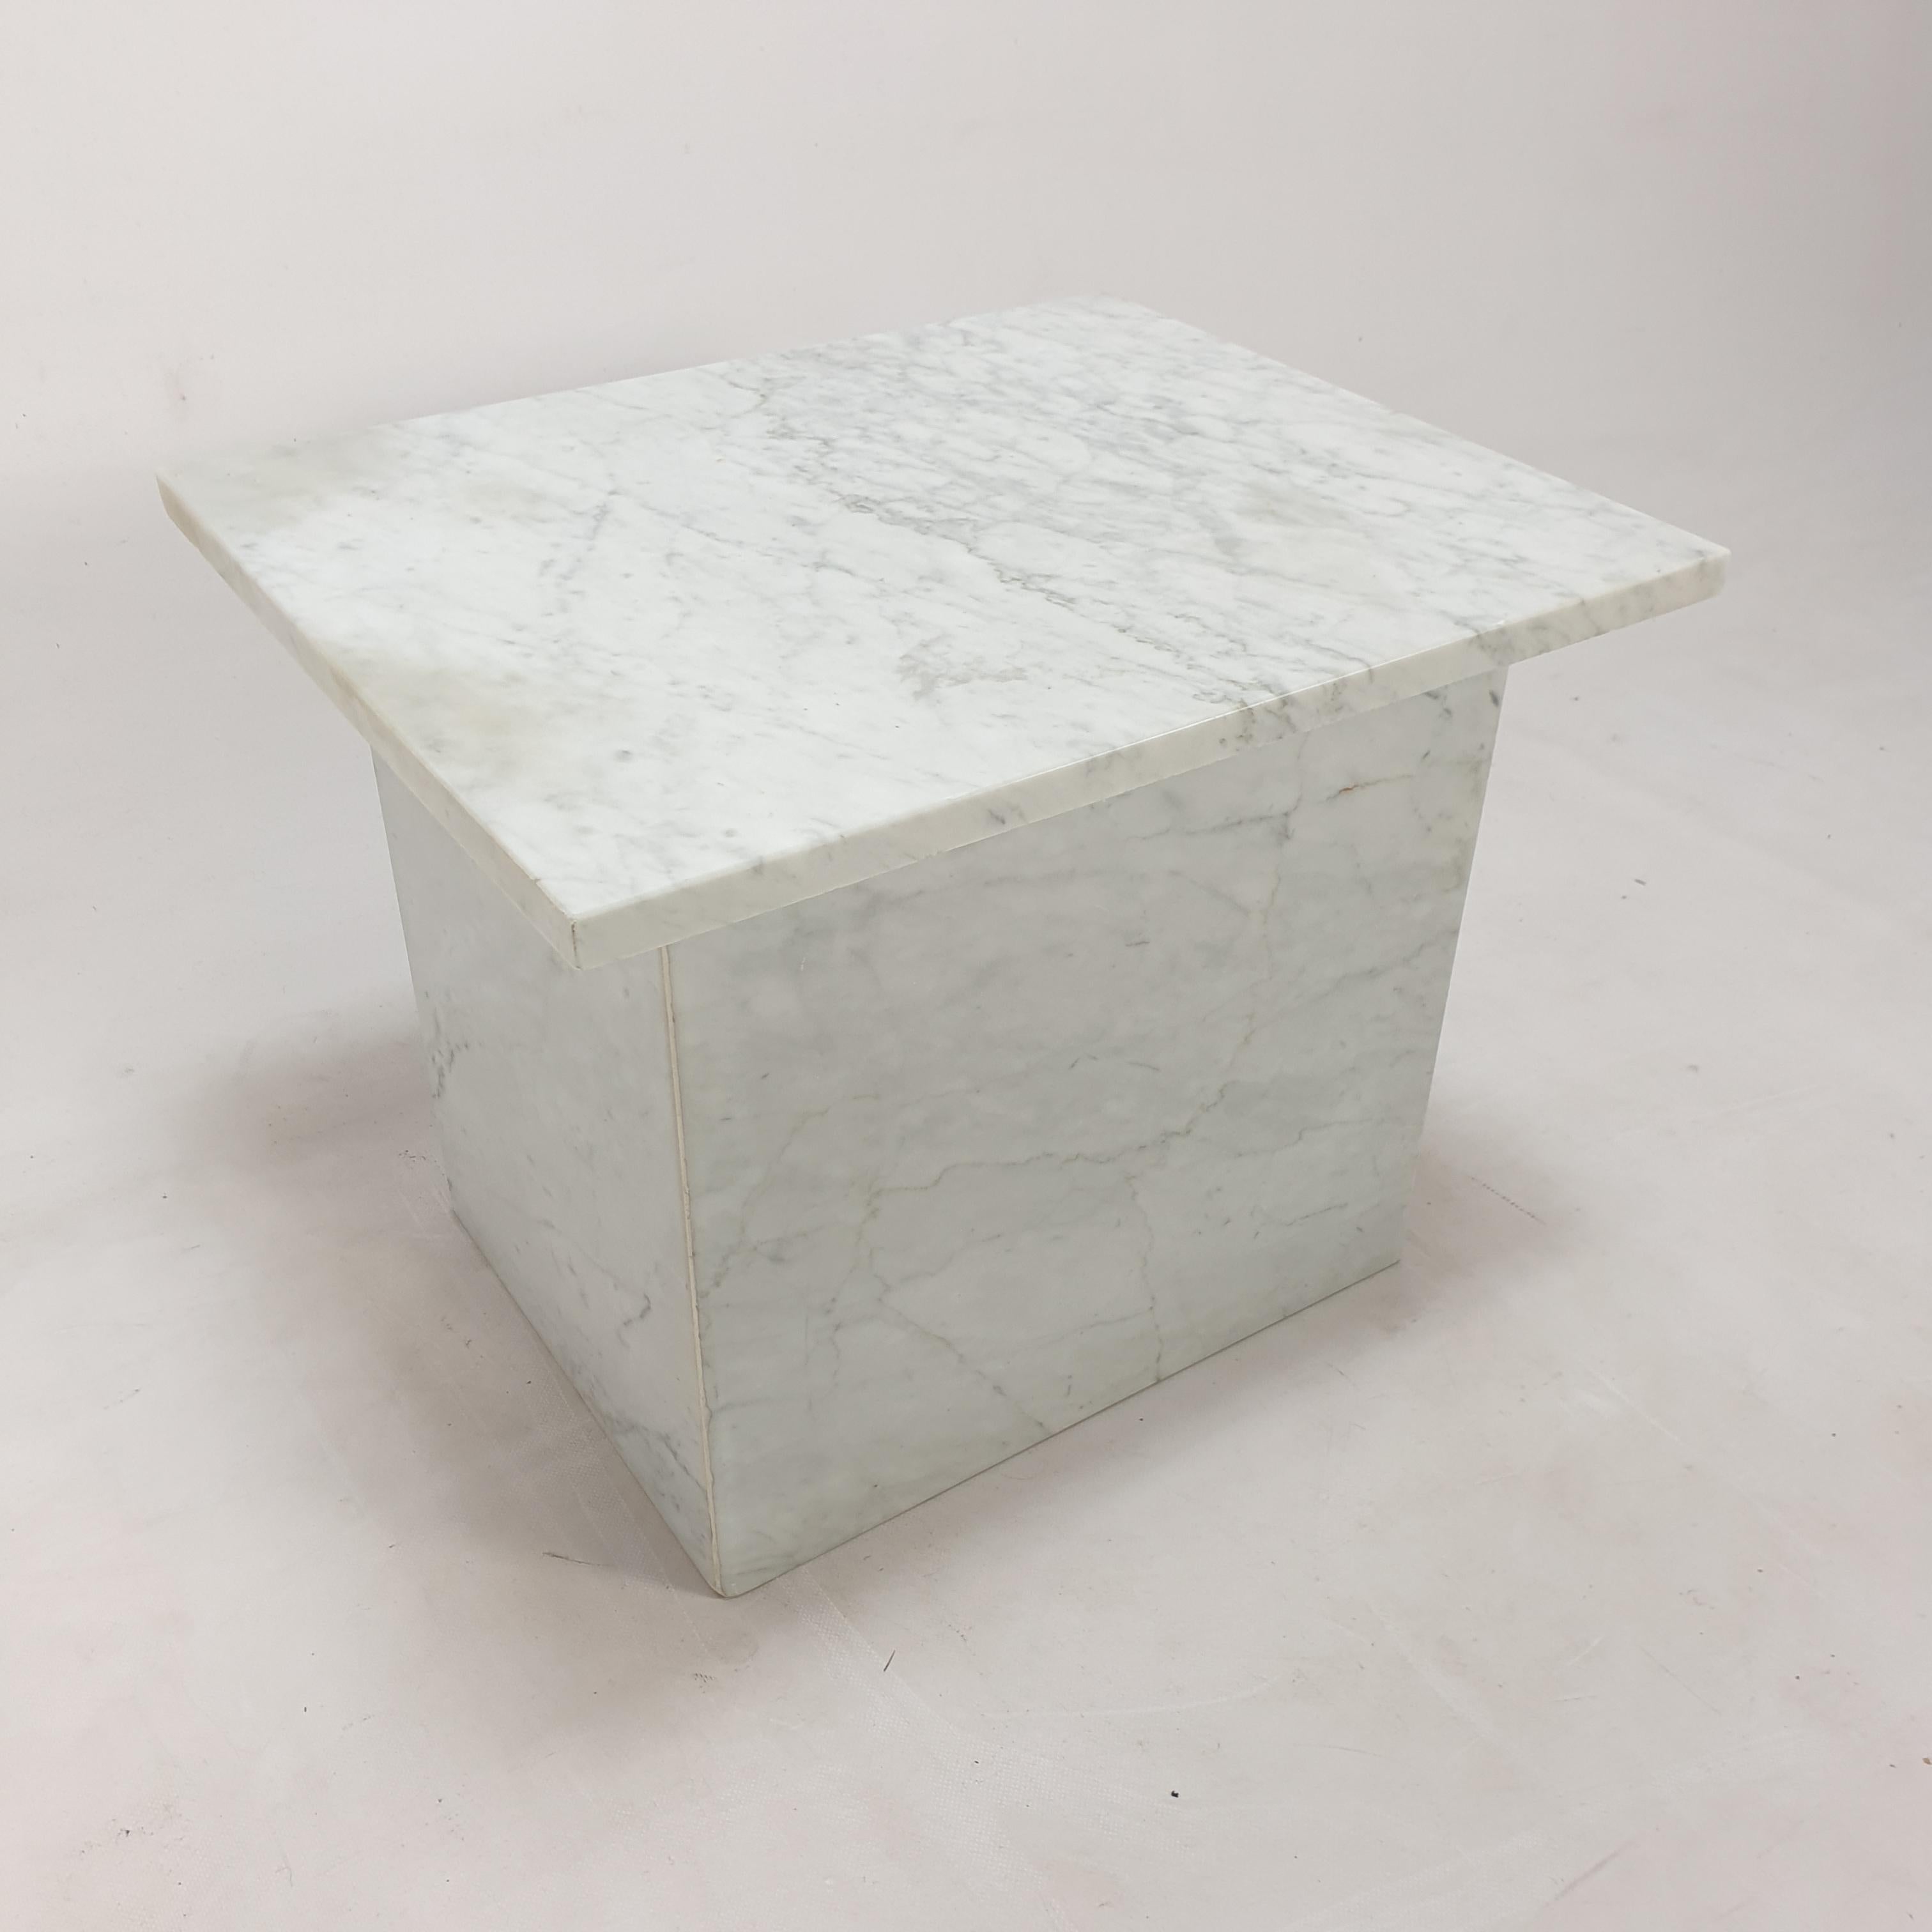 Italian Marble Coffee or Side Table, 1980s For Sale 9